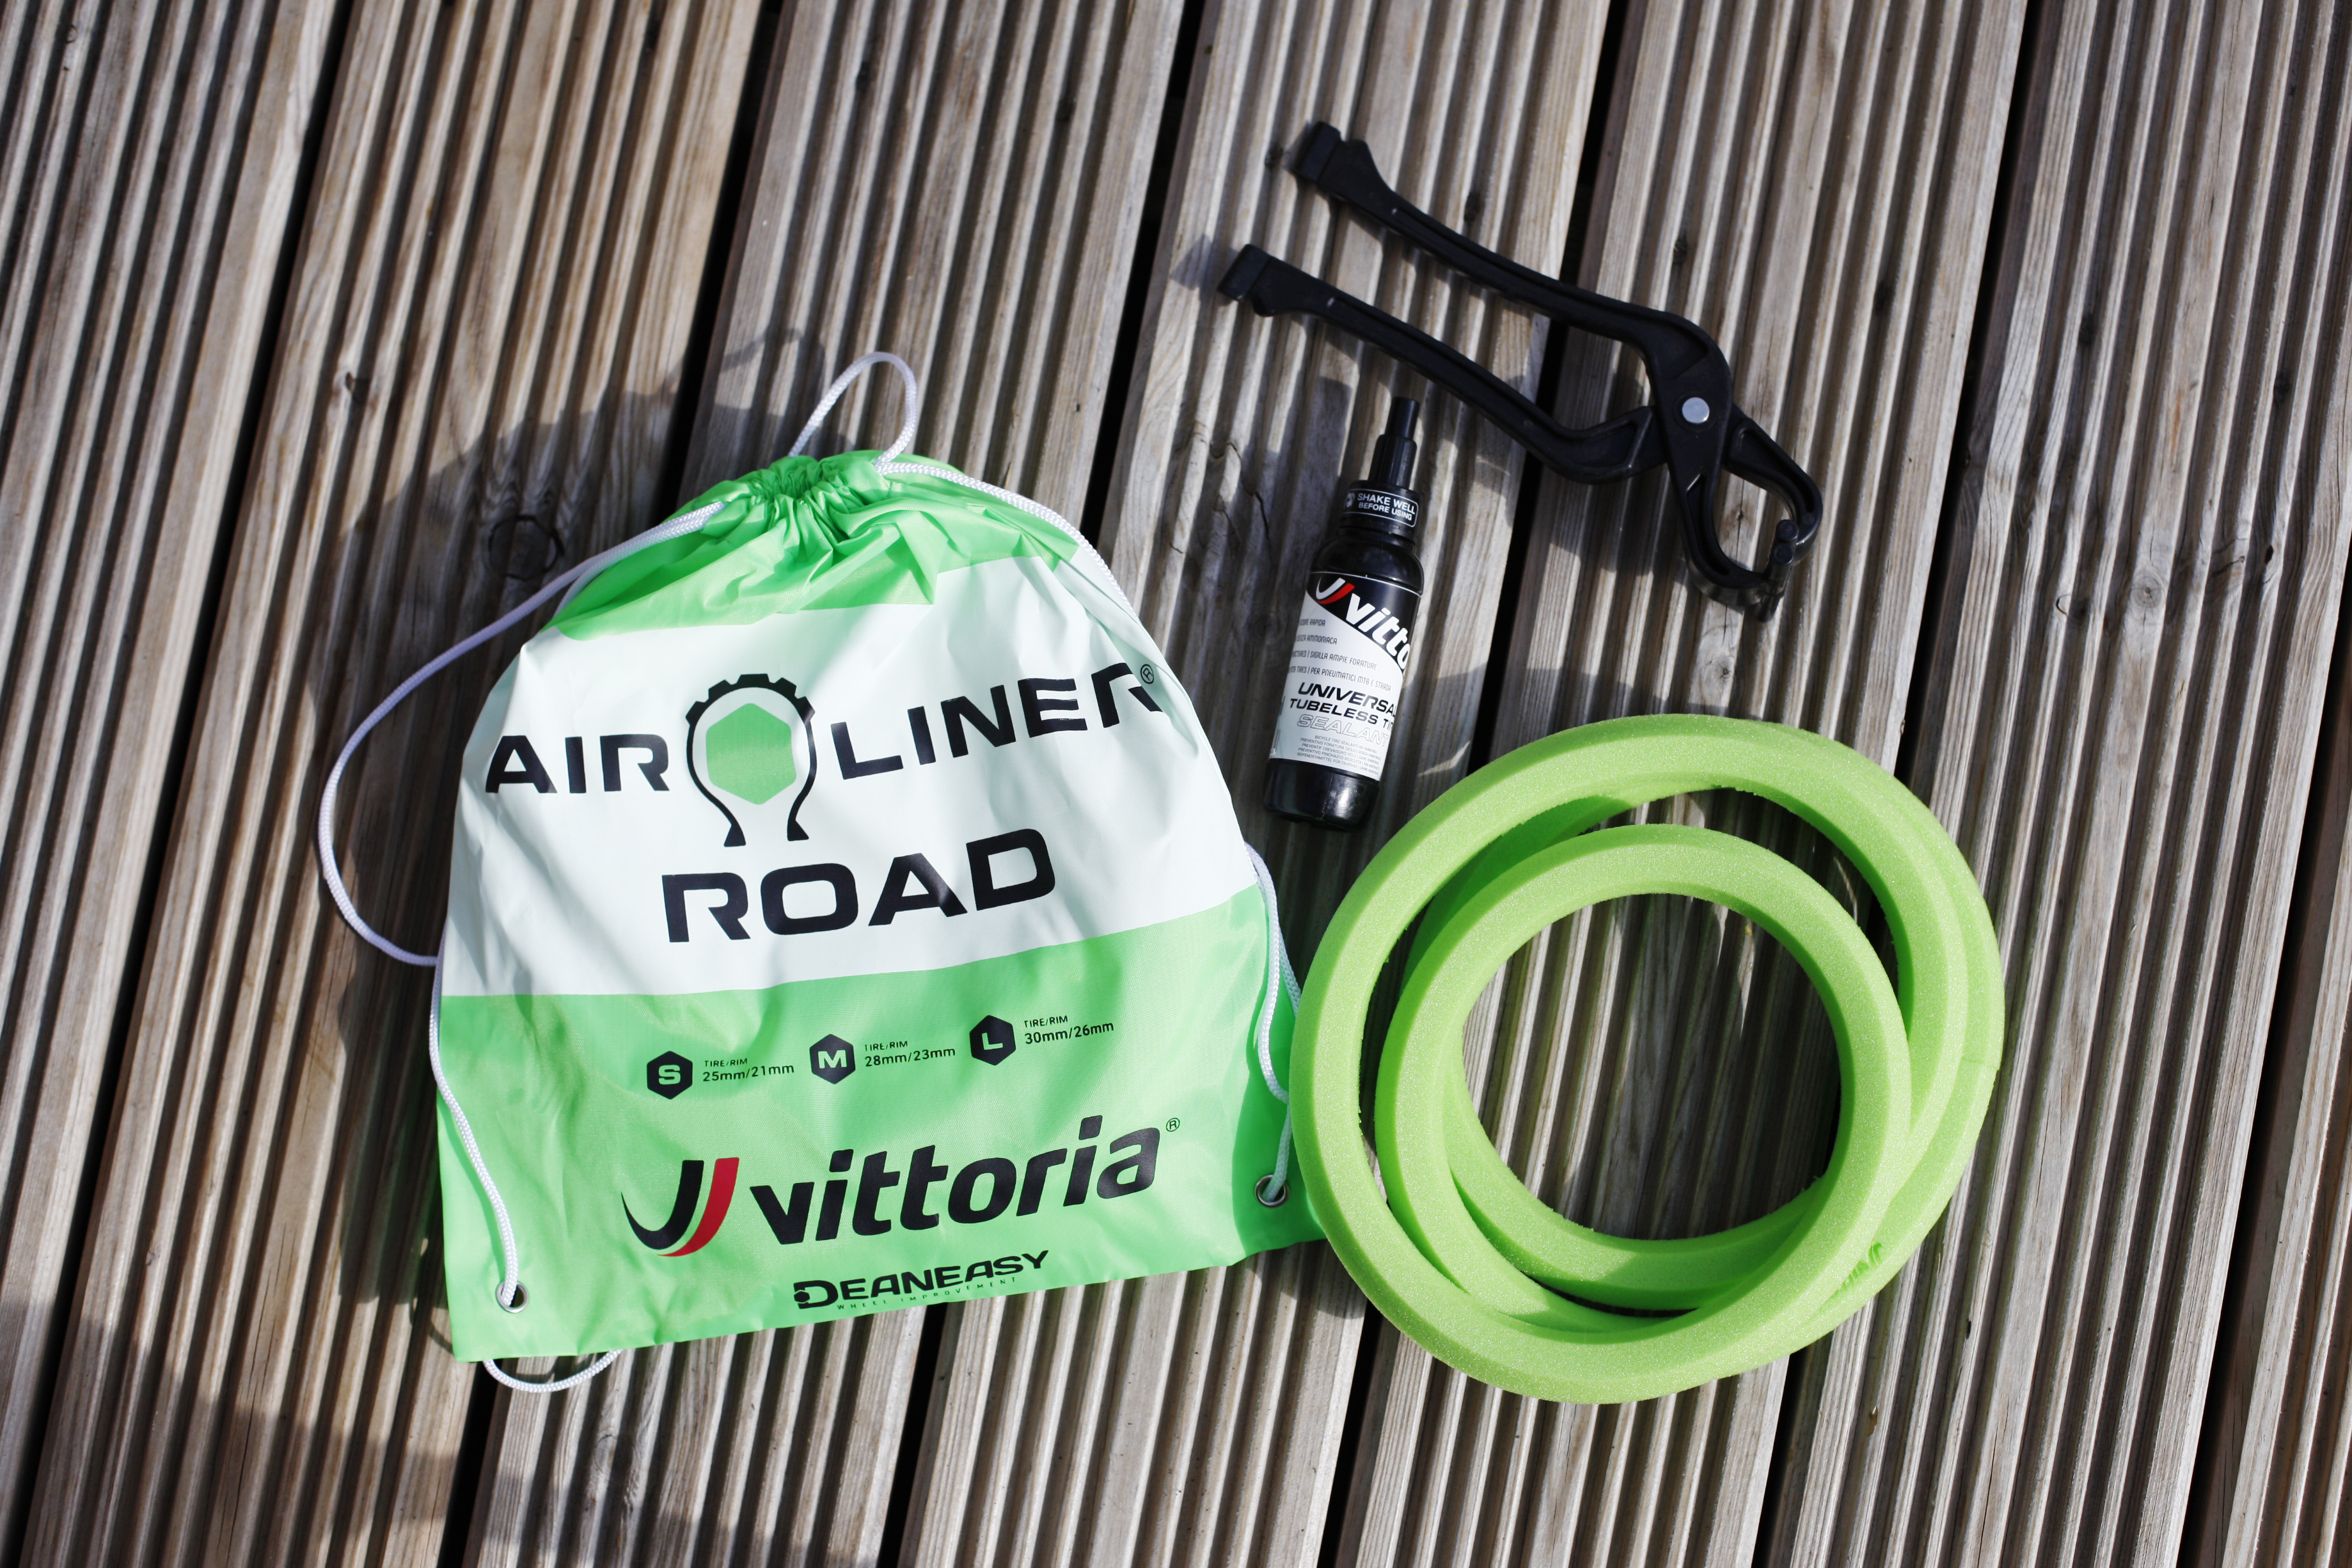 Vittoria Air-Liner Road Review: Do Road Bikes Need Tubeless Tire Inserts?  Maybe